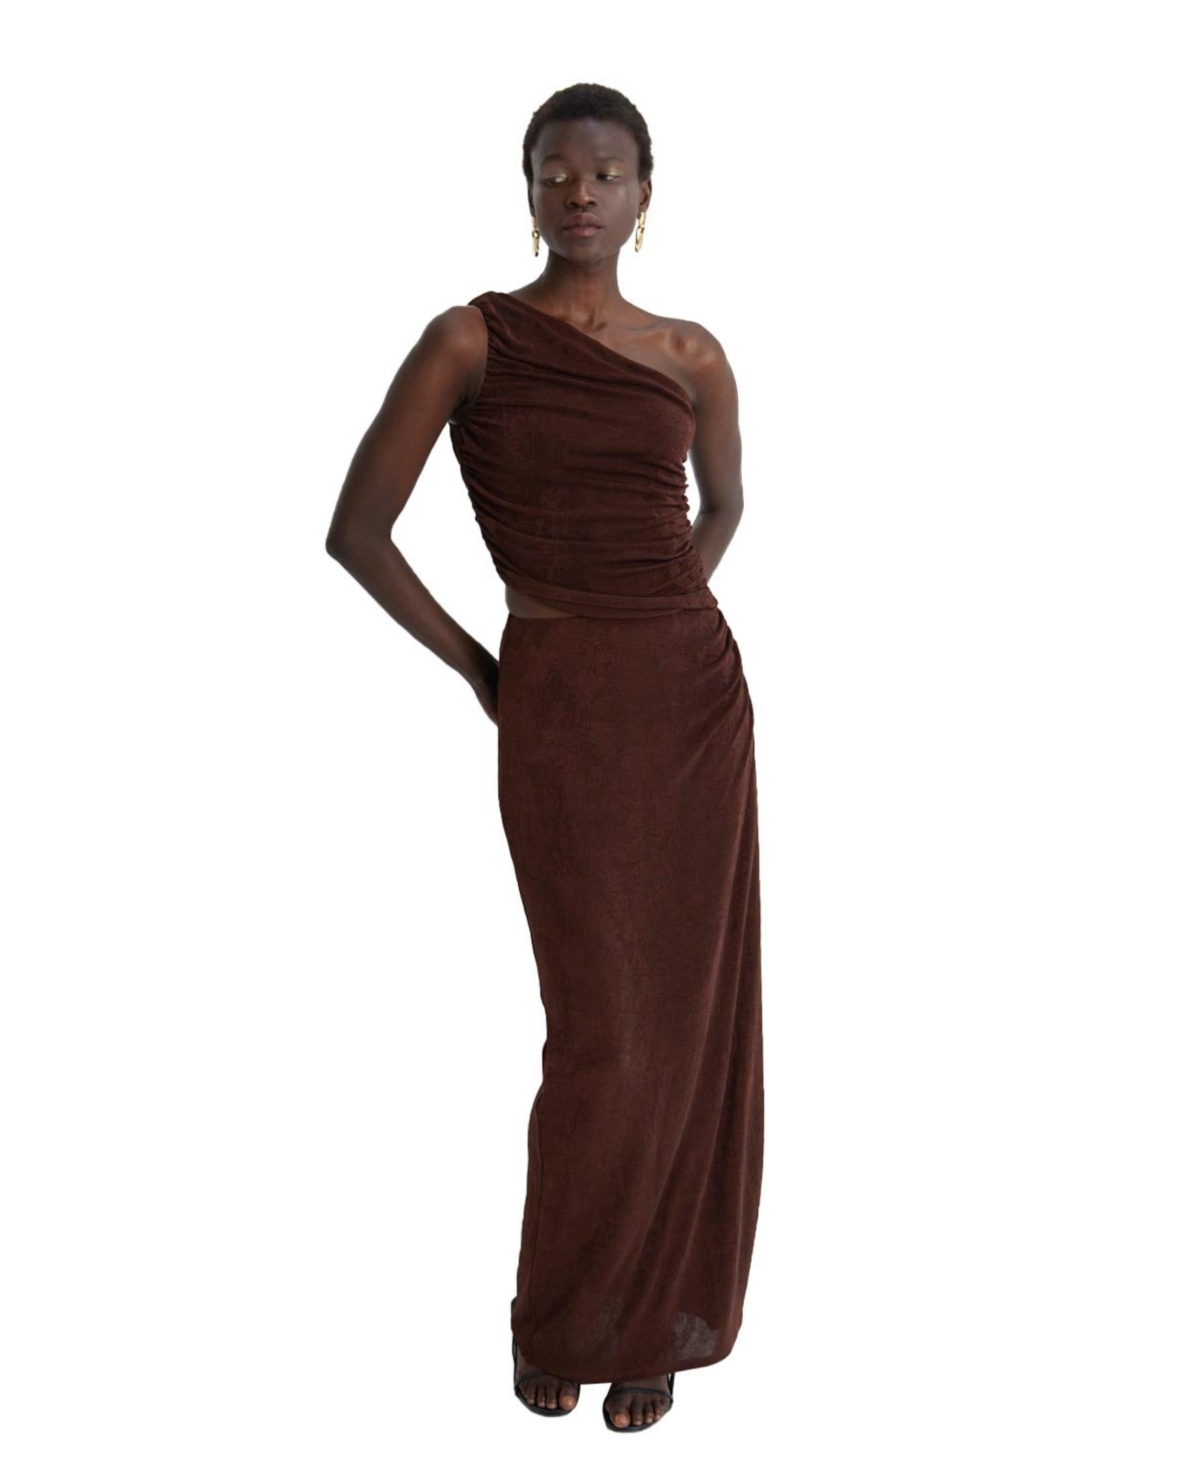 Women's Kaia One Shoulder Ruched Top & Skirt Set - Brown